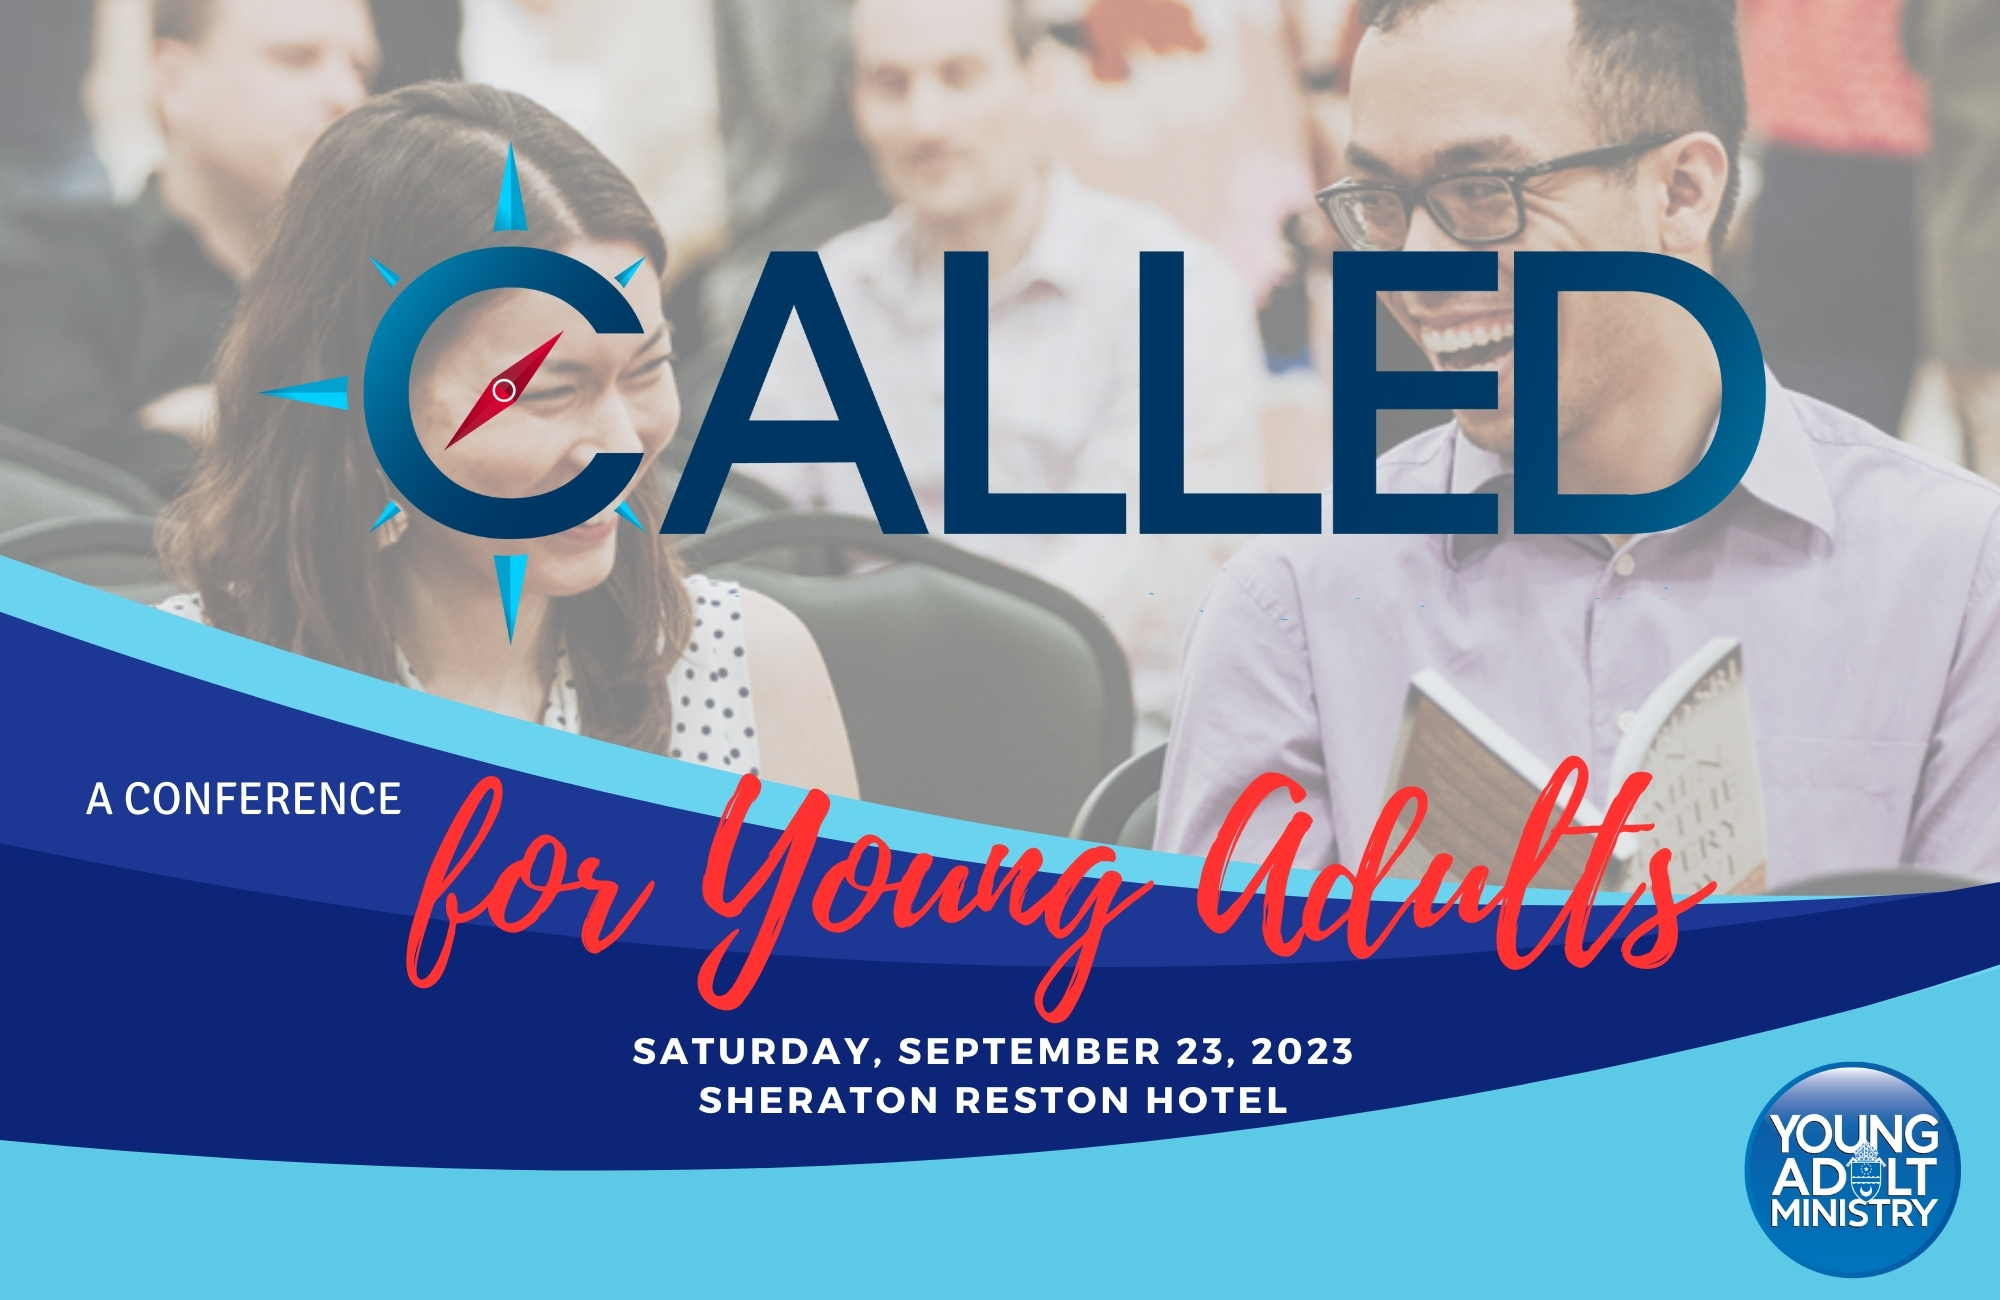 CALLED: A Conference for Young Adults